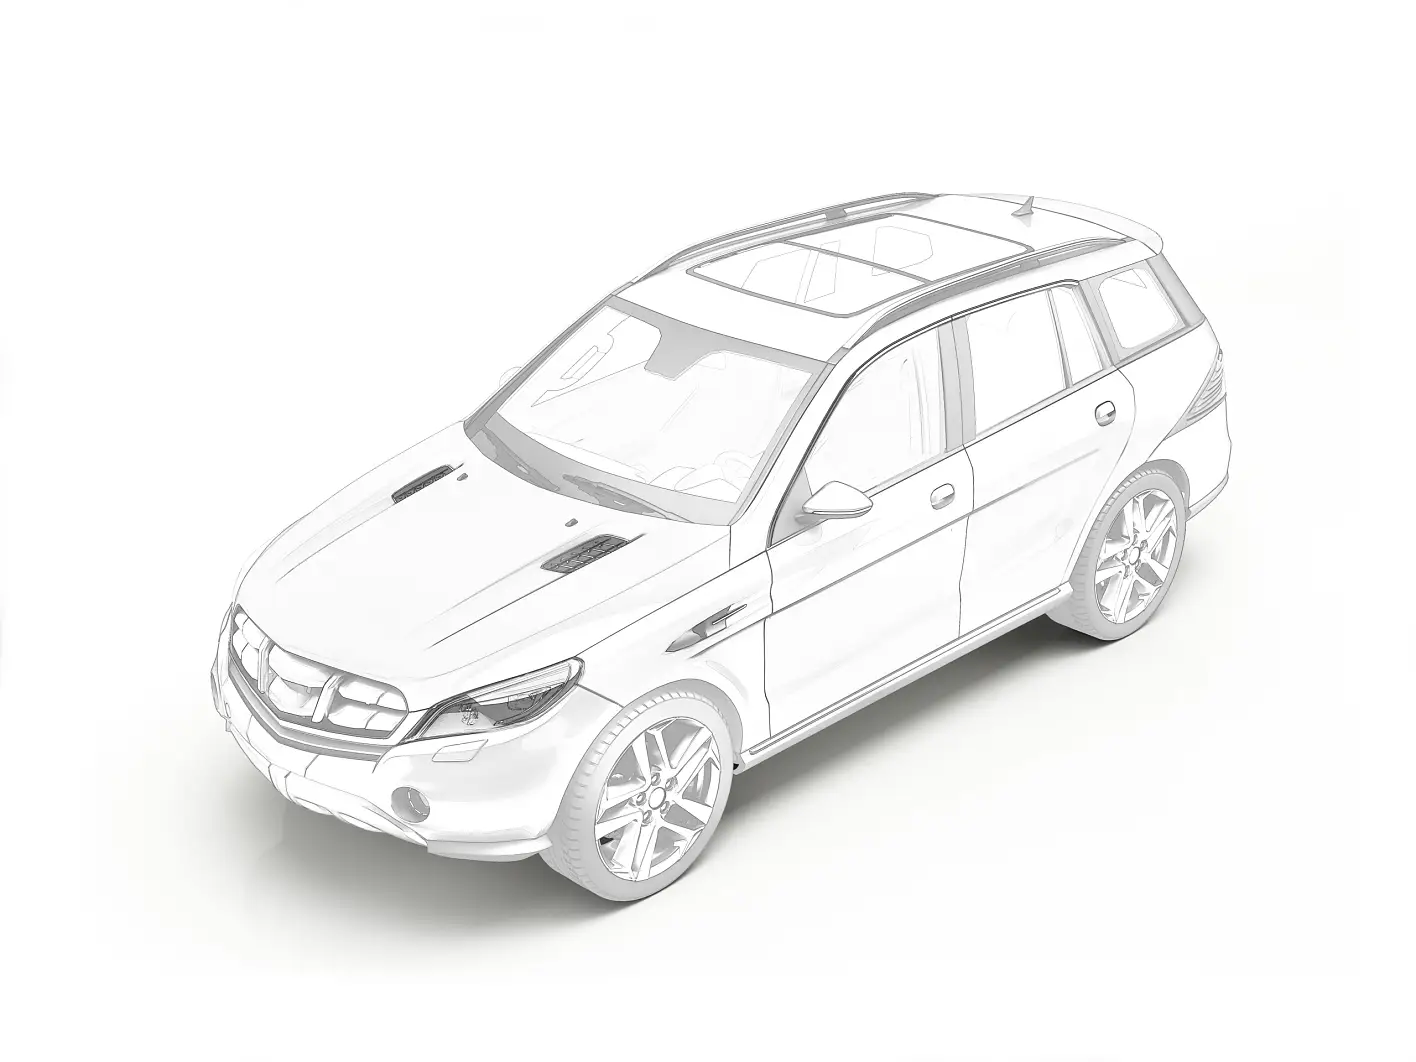 Suv generic car stylized 3D rendering. On white bacground.